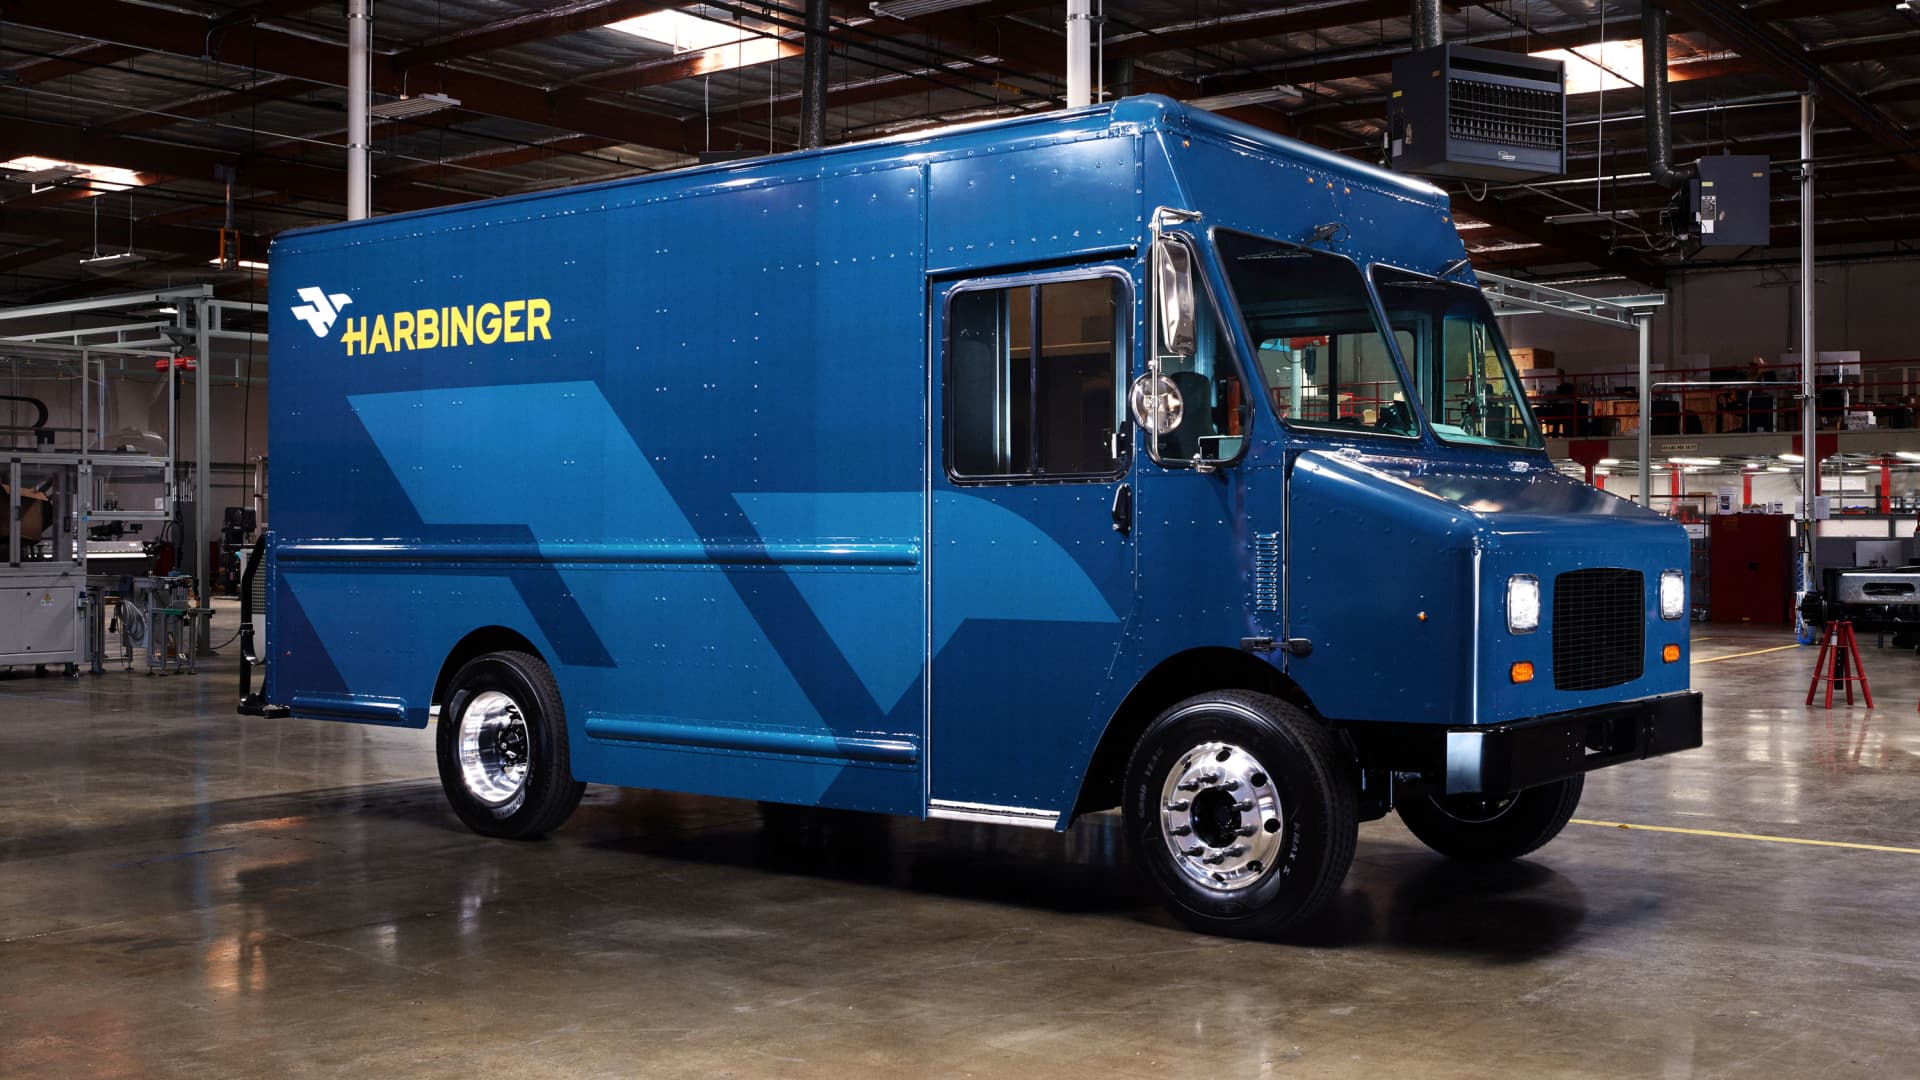 EV startup Harbinger, founded by Canoo and QuantumScape veterans, aims to shake up medium-duty truck market Auto Recent